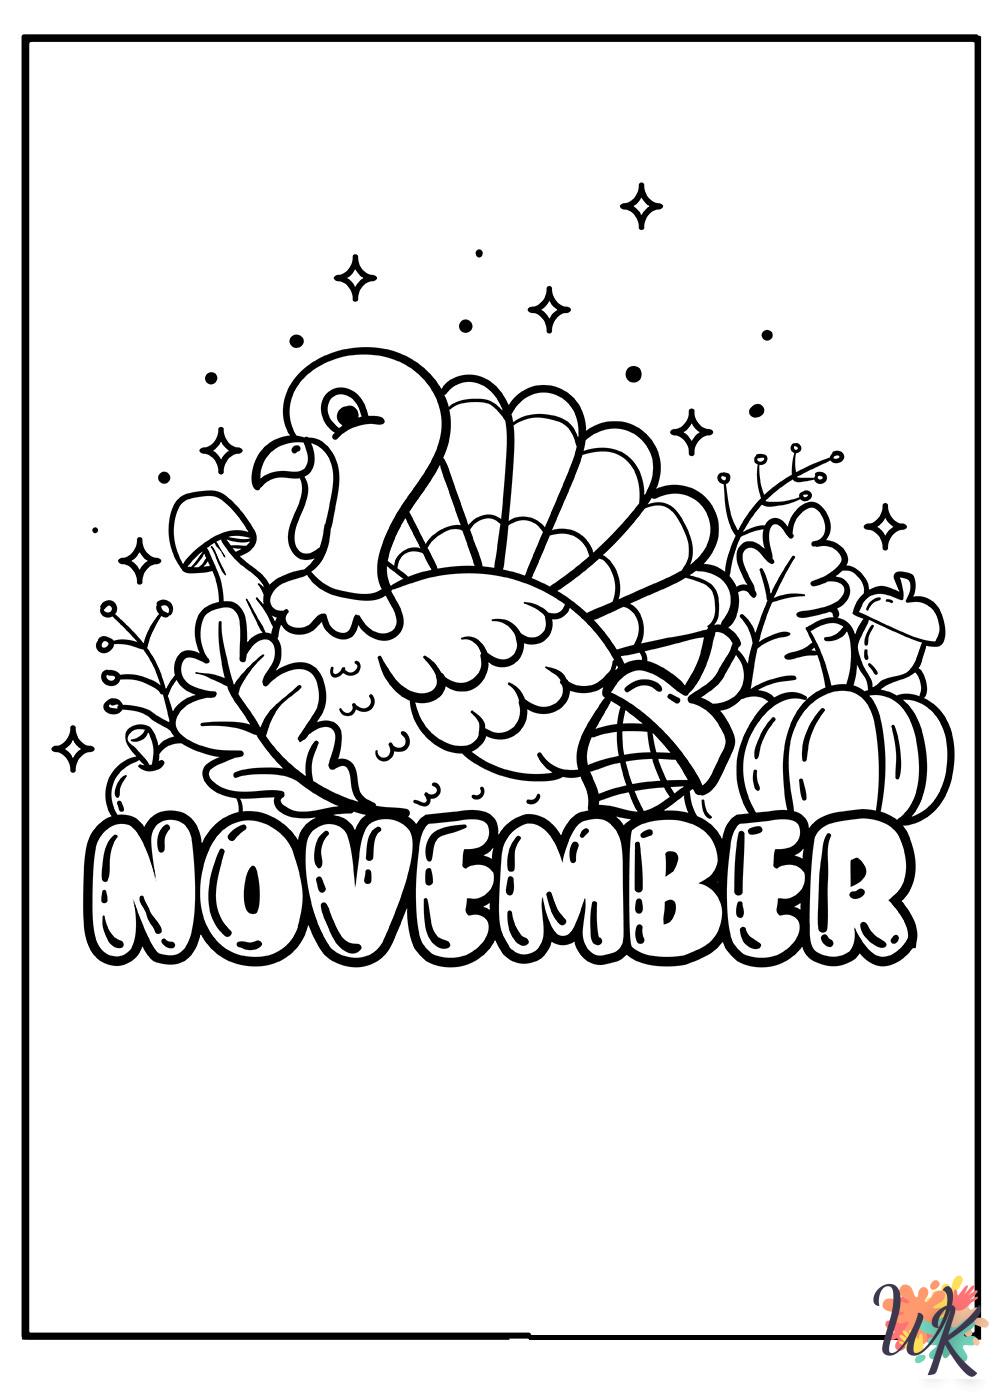 November coloring pages for adults easy